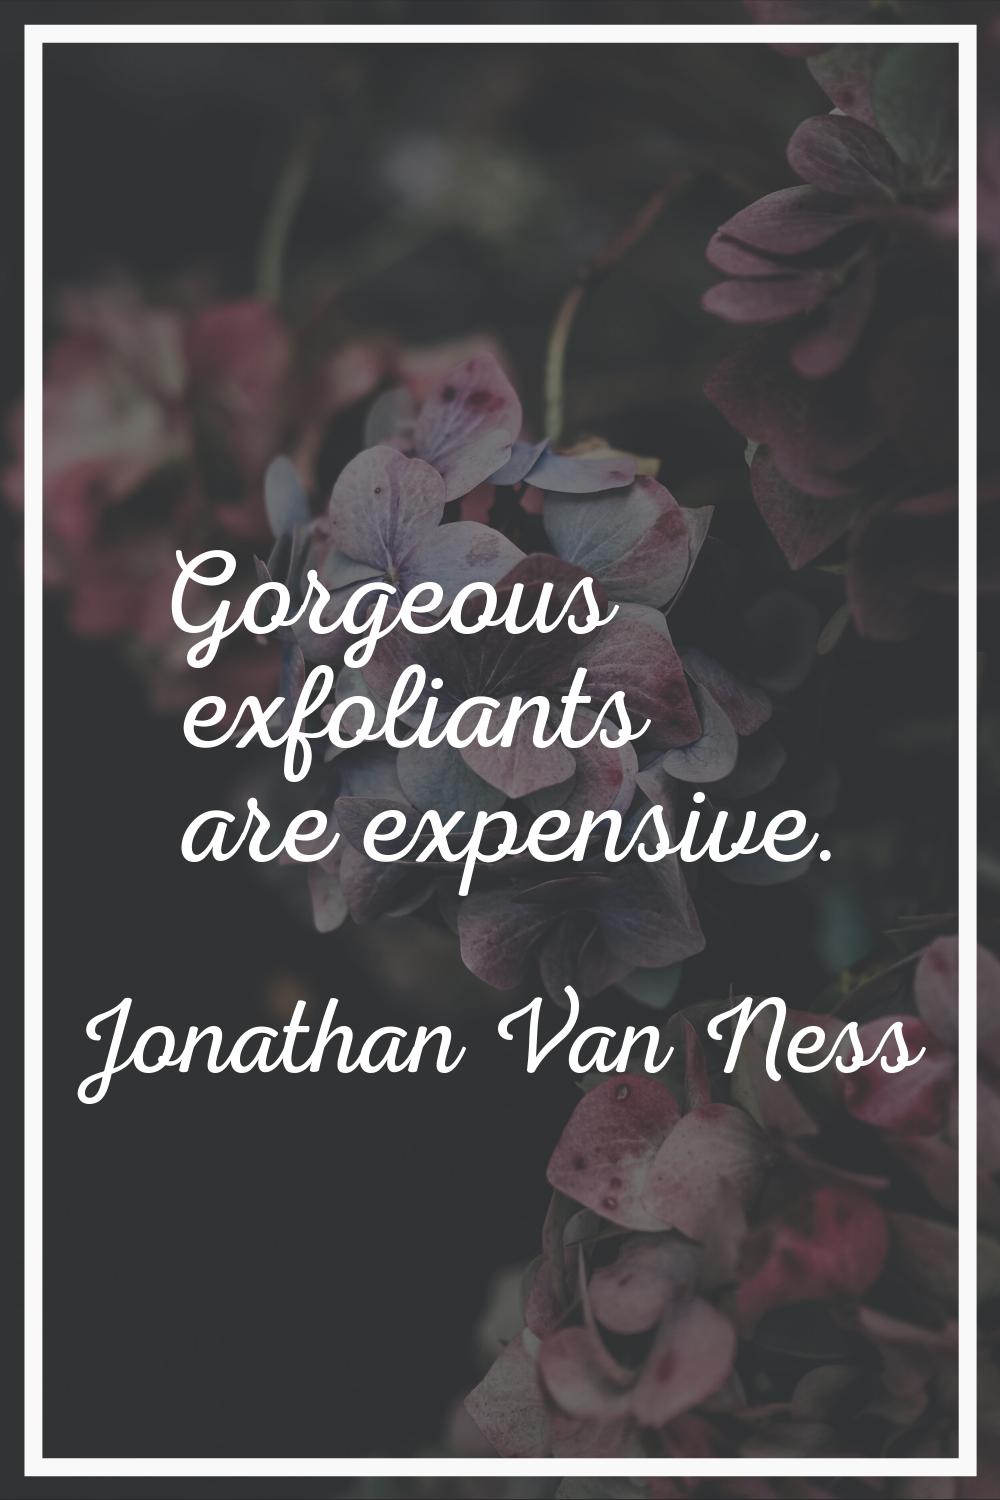 Gorgeous exfoliants are expensive.